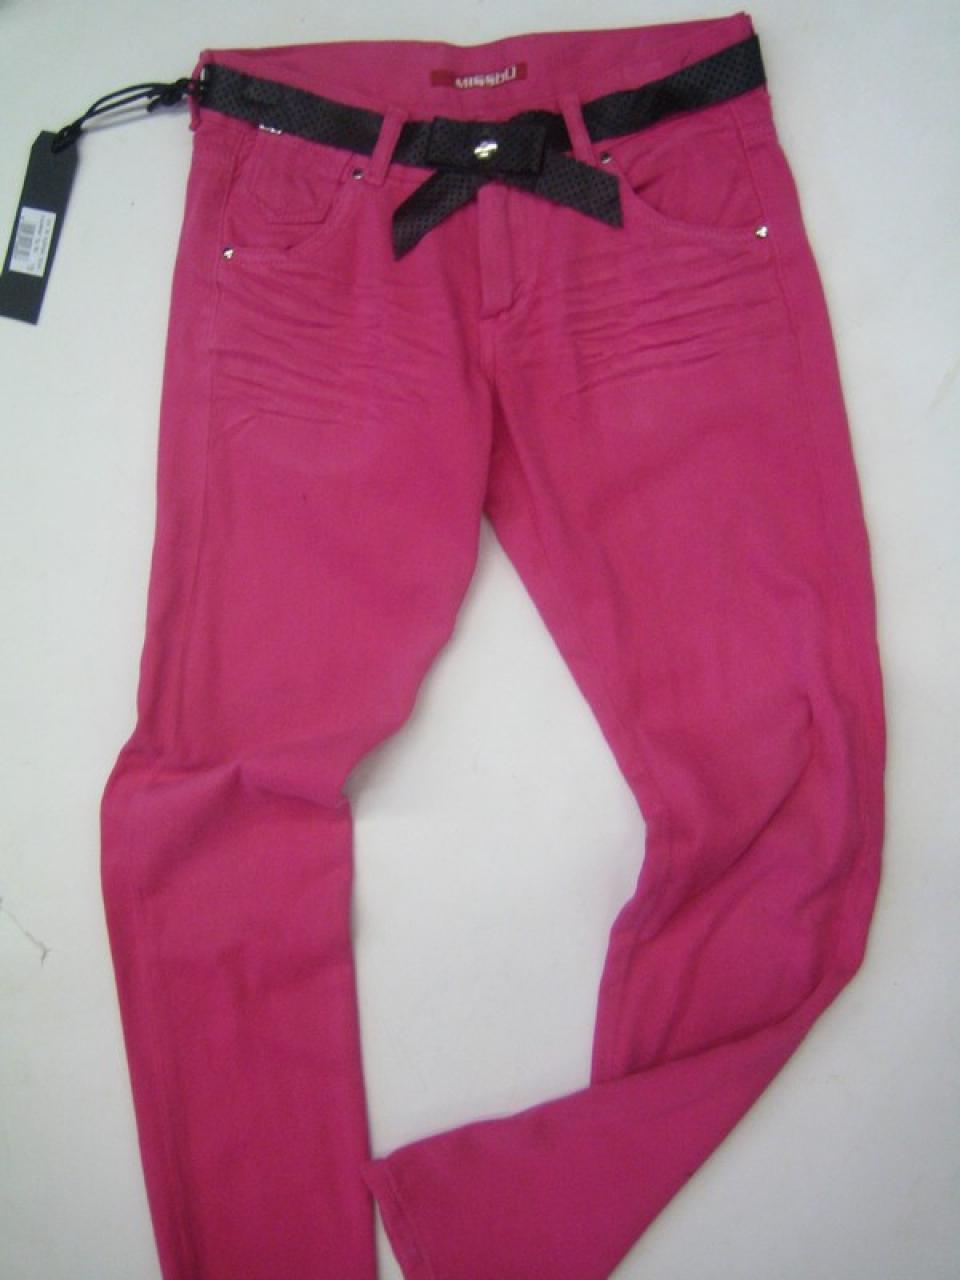 miss sixty kids clothing hot pink jeans 12yrs